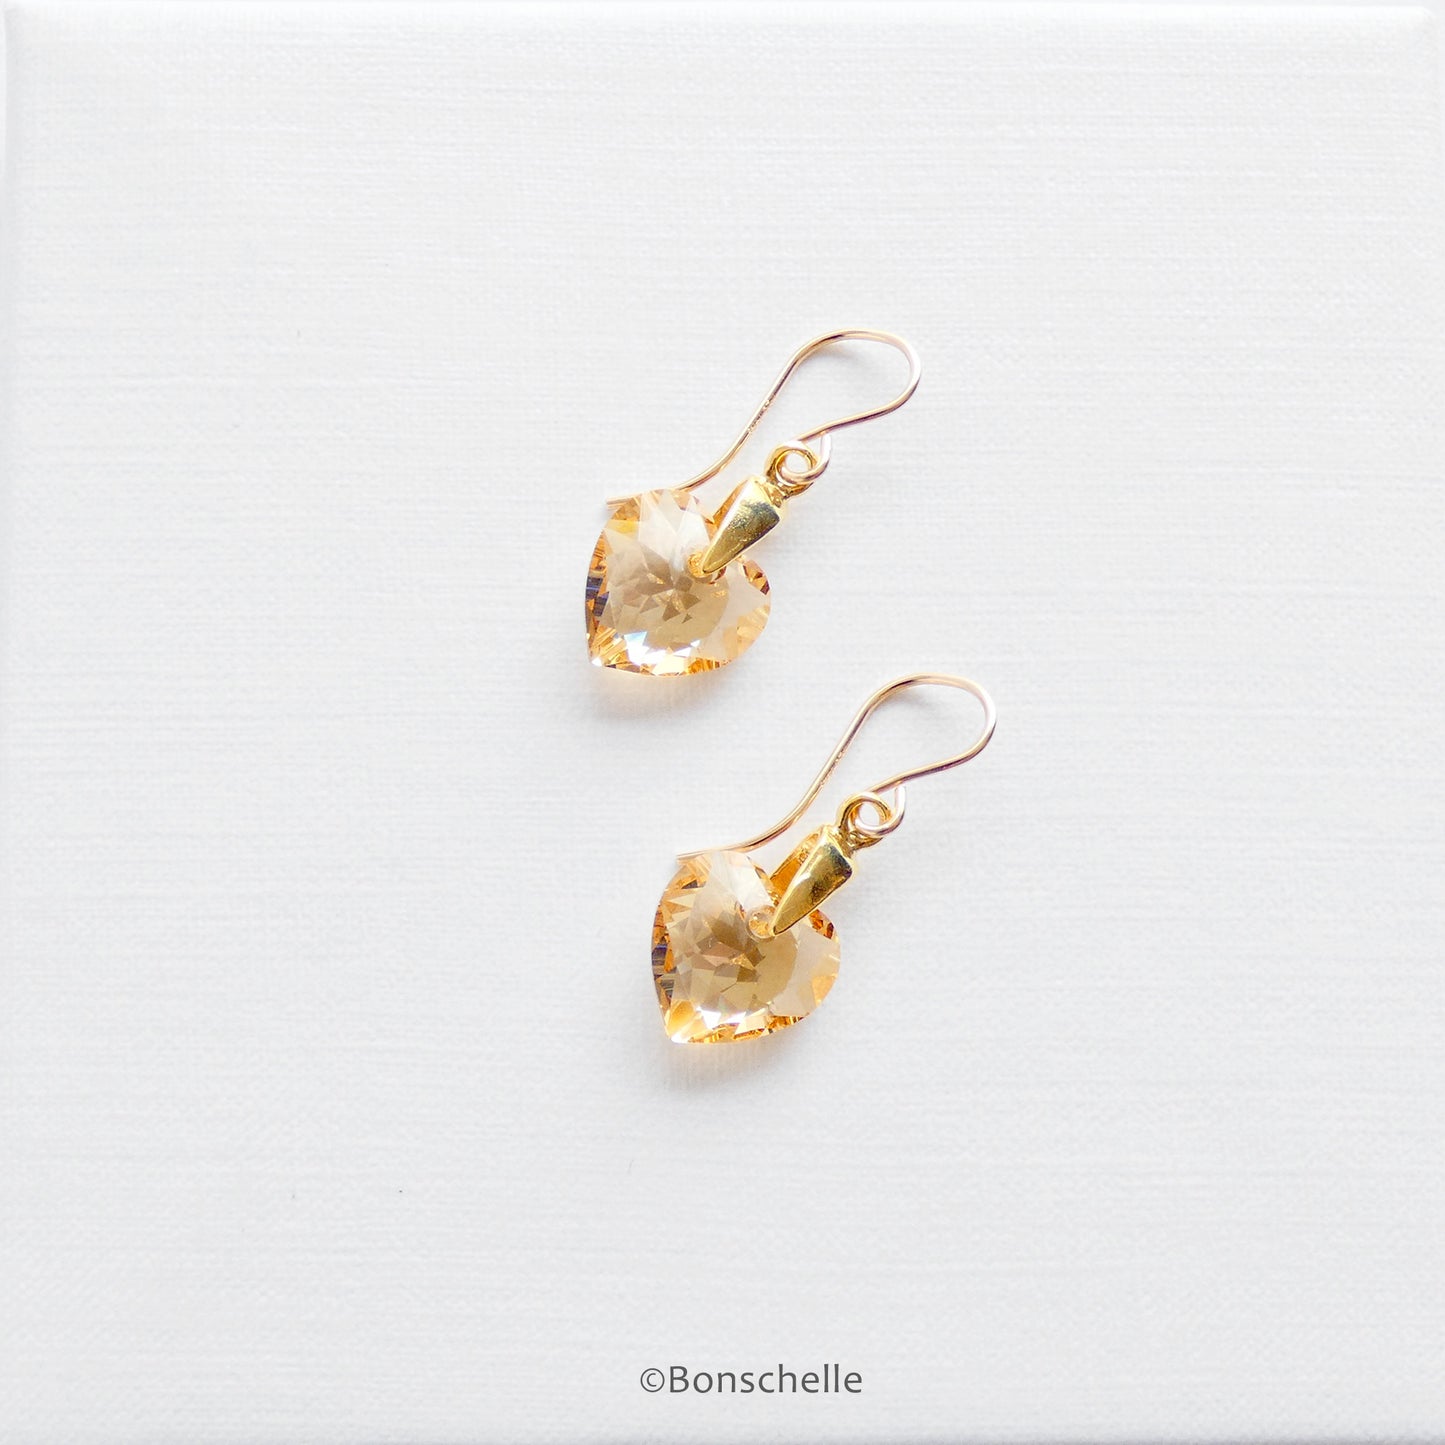 alternative view of Handmade earrings with pale golden bronze toned Swarovski crystal heart earrings and 14K gold filled earwires .